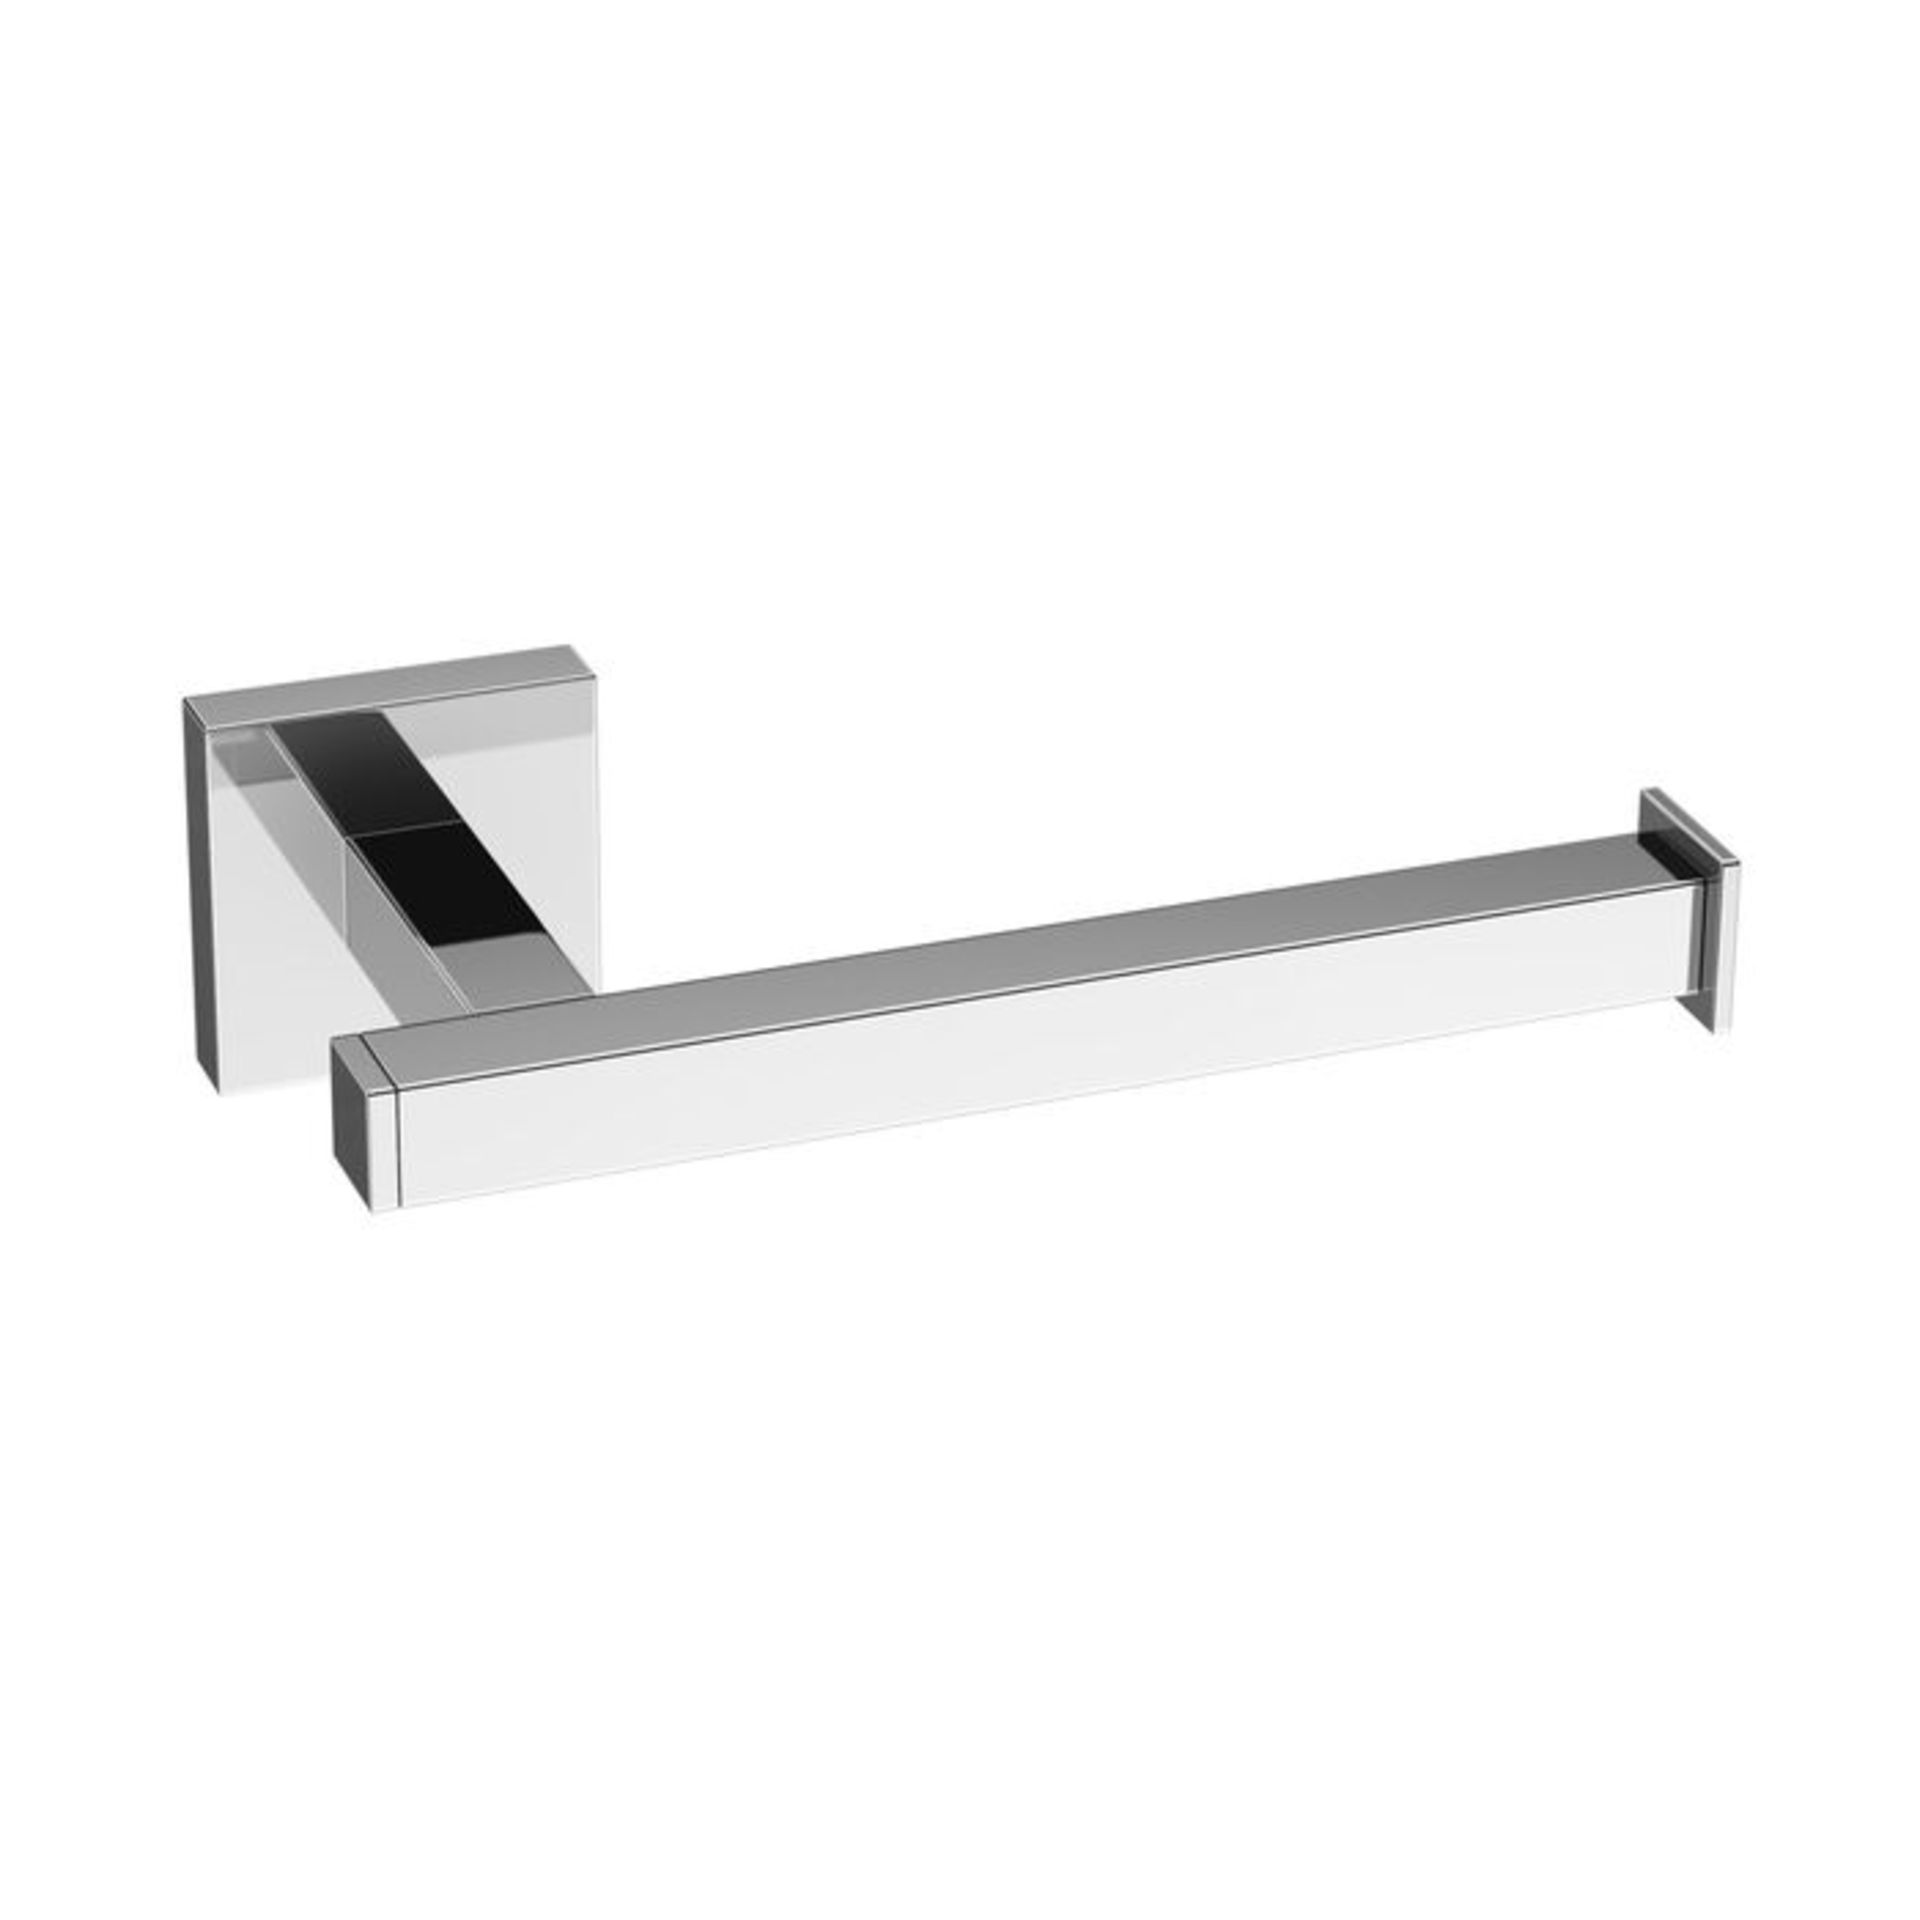 (PP1011) Jesmond Toilet Roll Holder Finishes your bathroom with a little extra functionality a... - Image 3 of 3